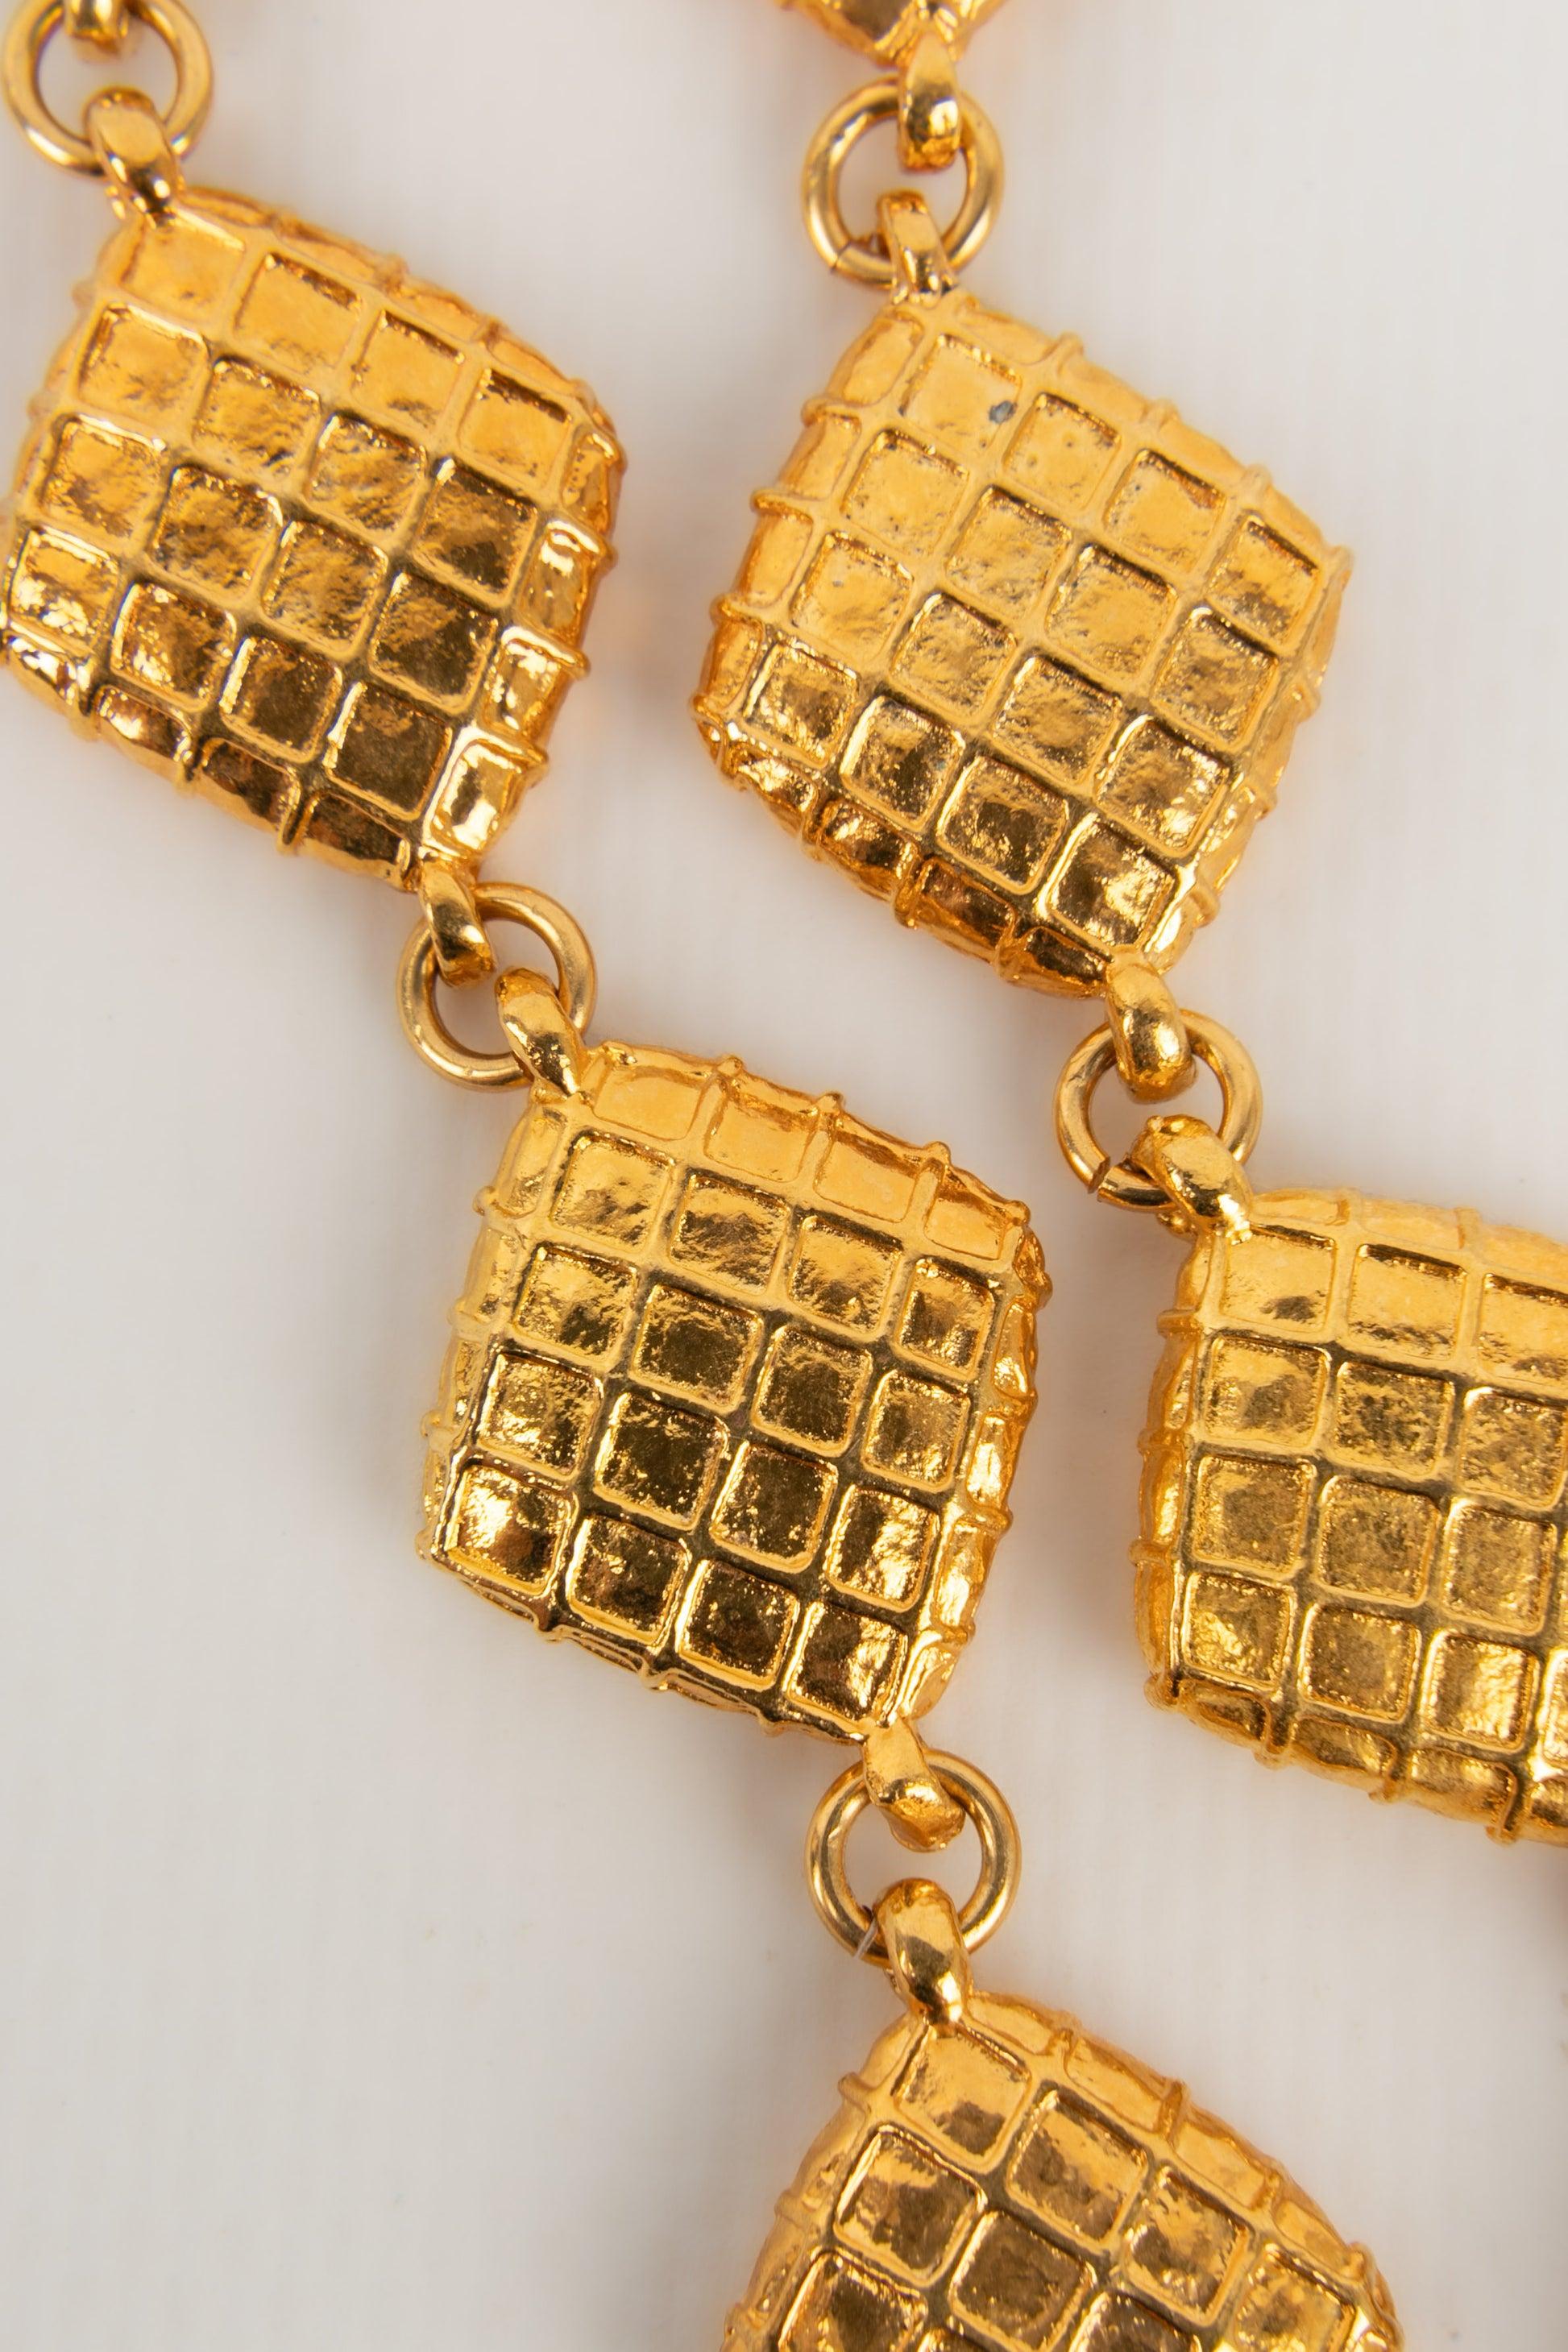 Chanel  Necklace in Golden Metal with Quilted Elements, 1990s For Sale 1